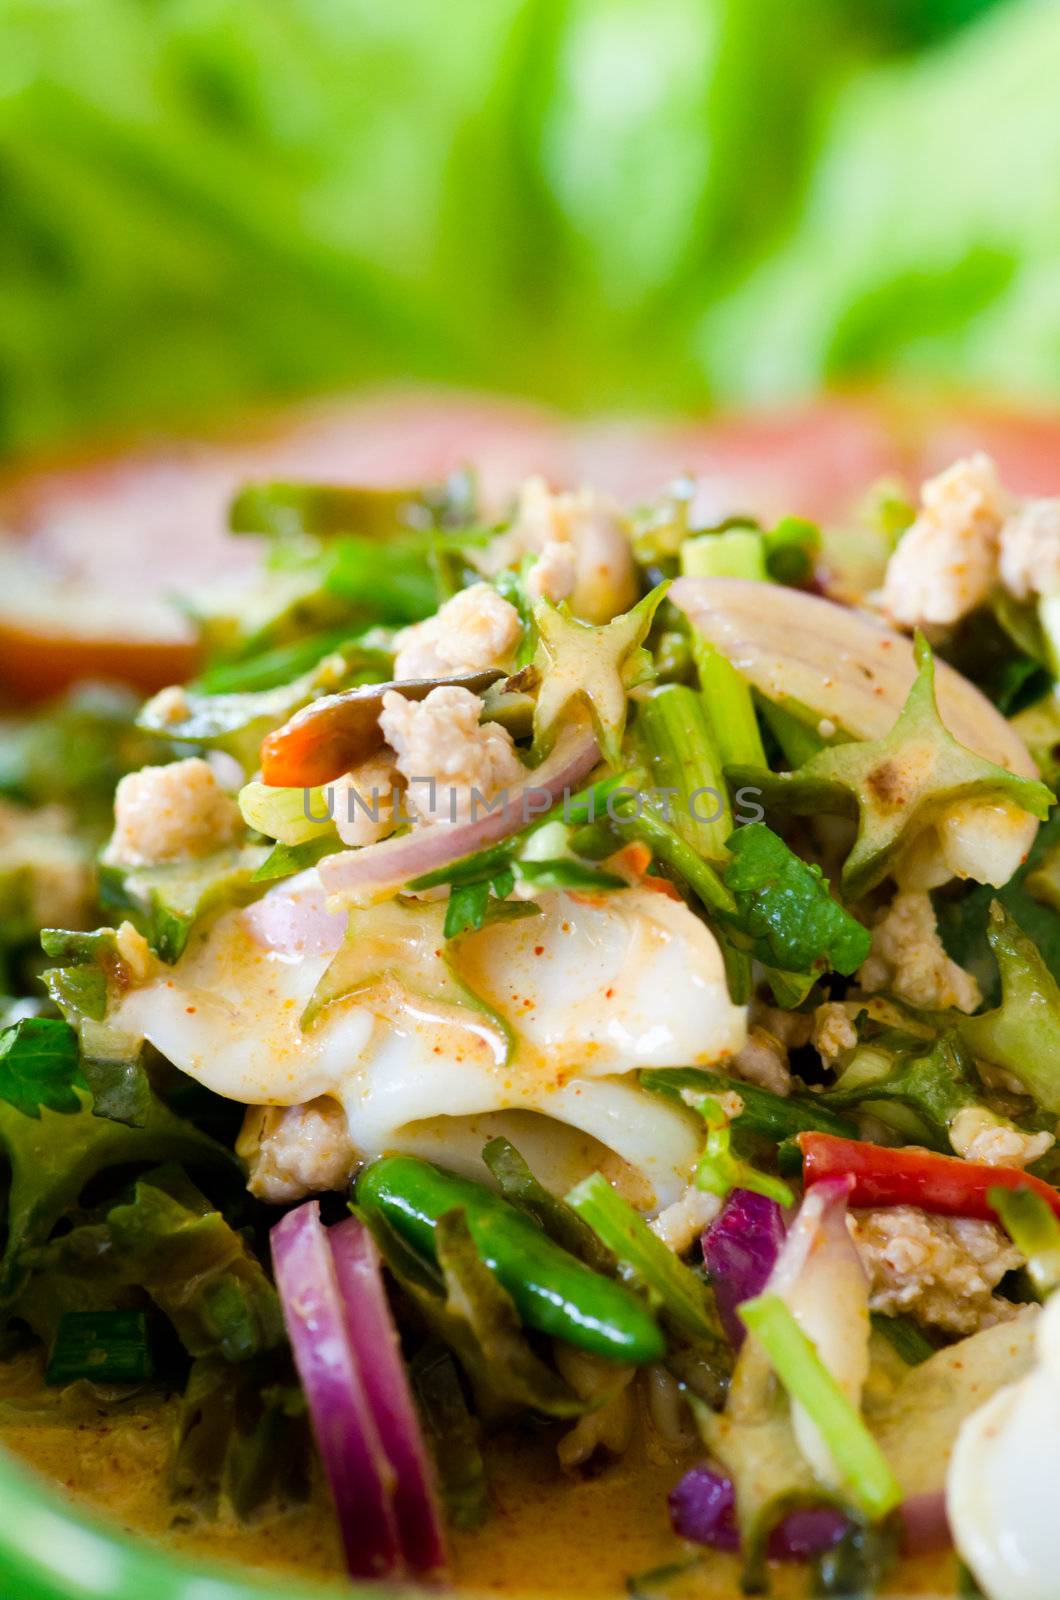 Winged bean in spicy coconut sauce salad by chatchai